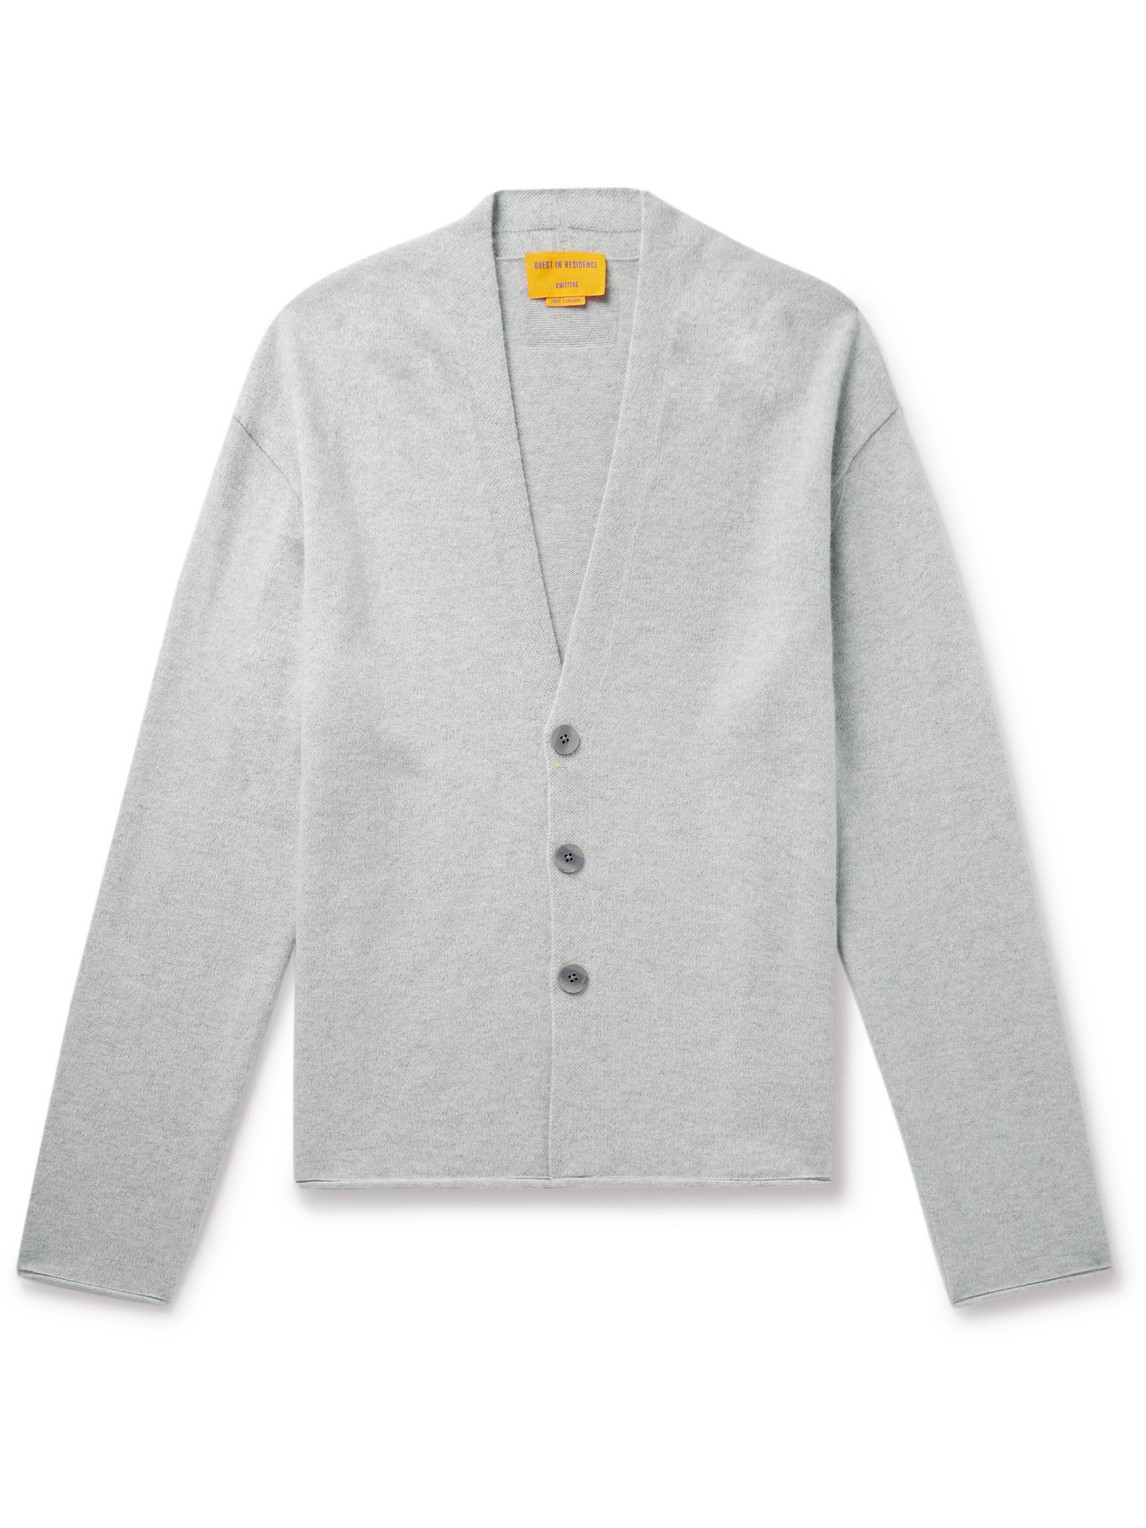 Guest In Residence - Everywear Cashmere Cardigan - Men - Gray - M von Guest In Residence